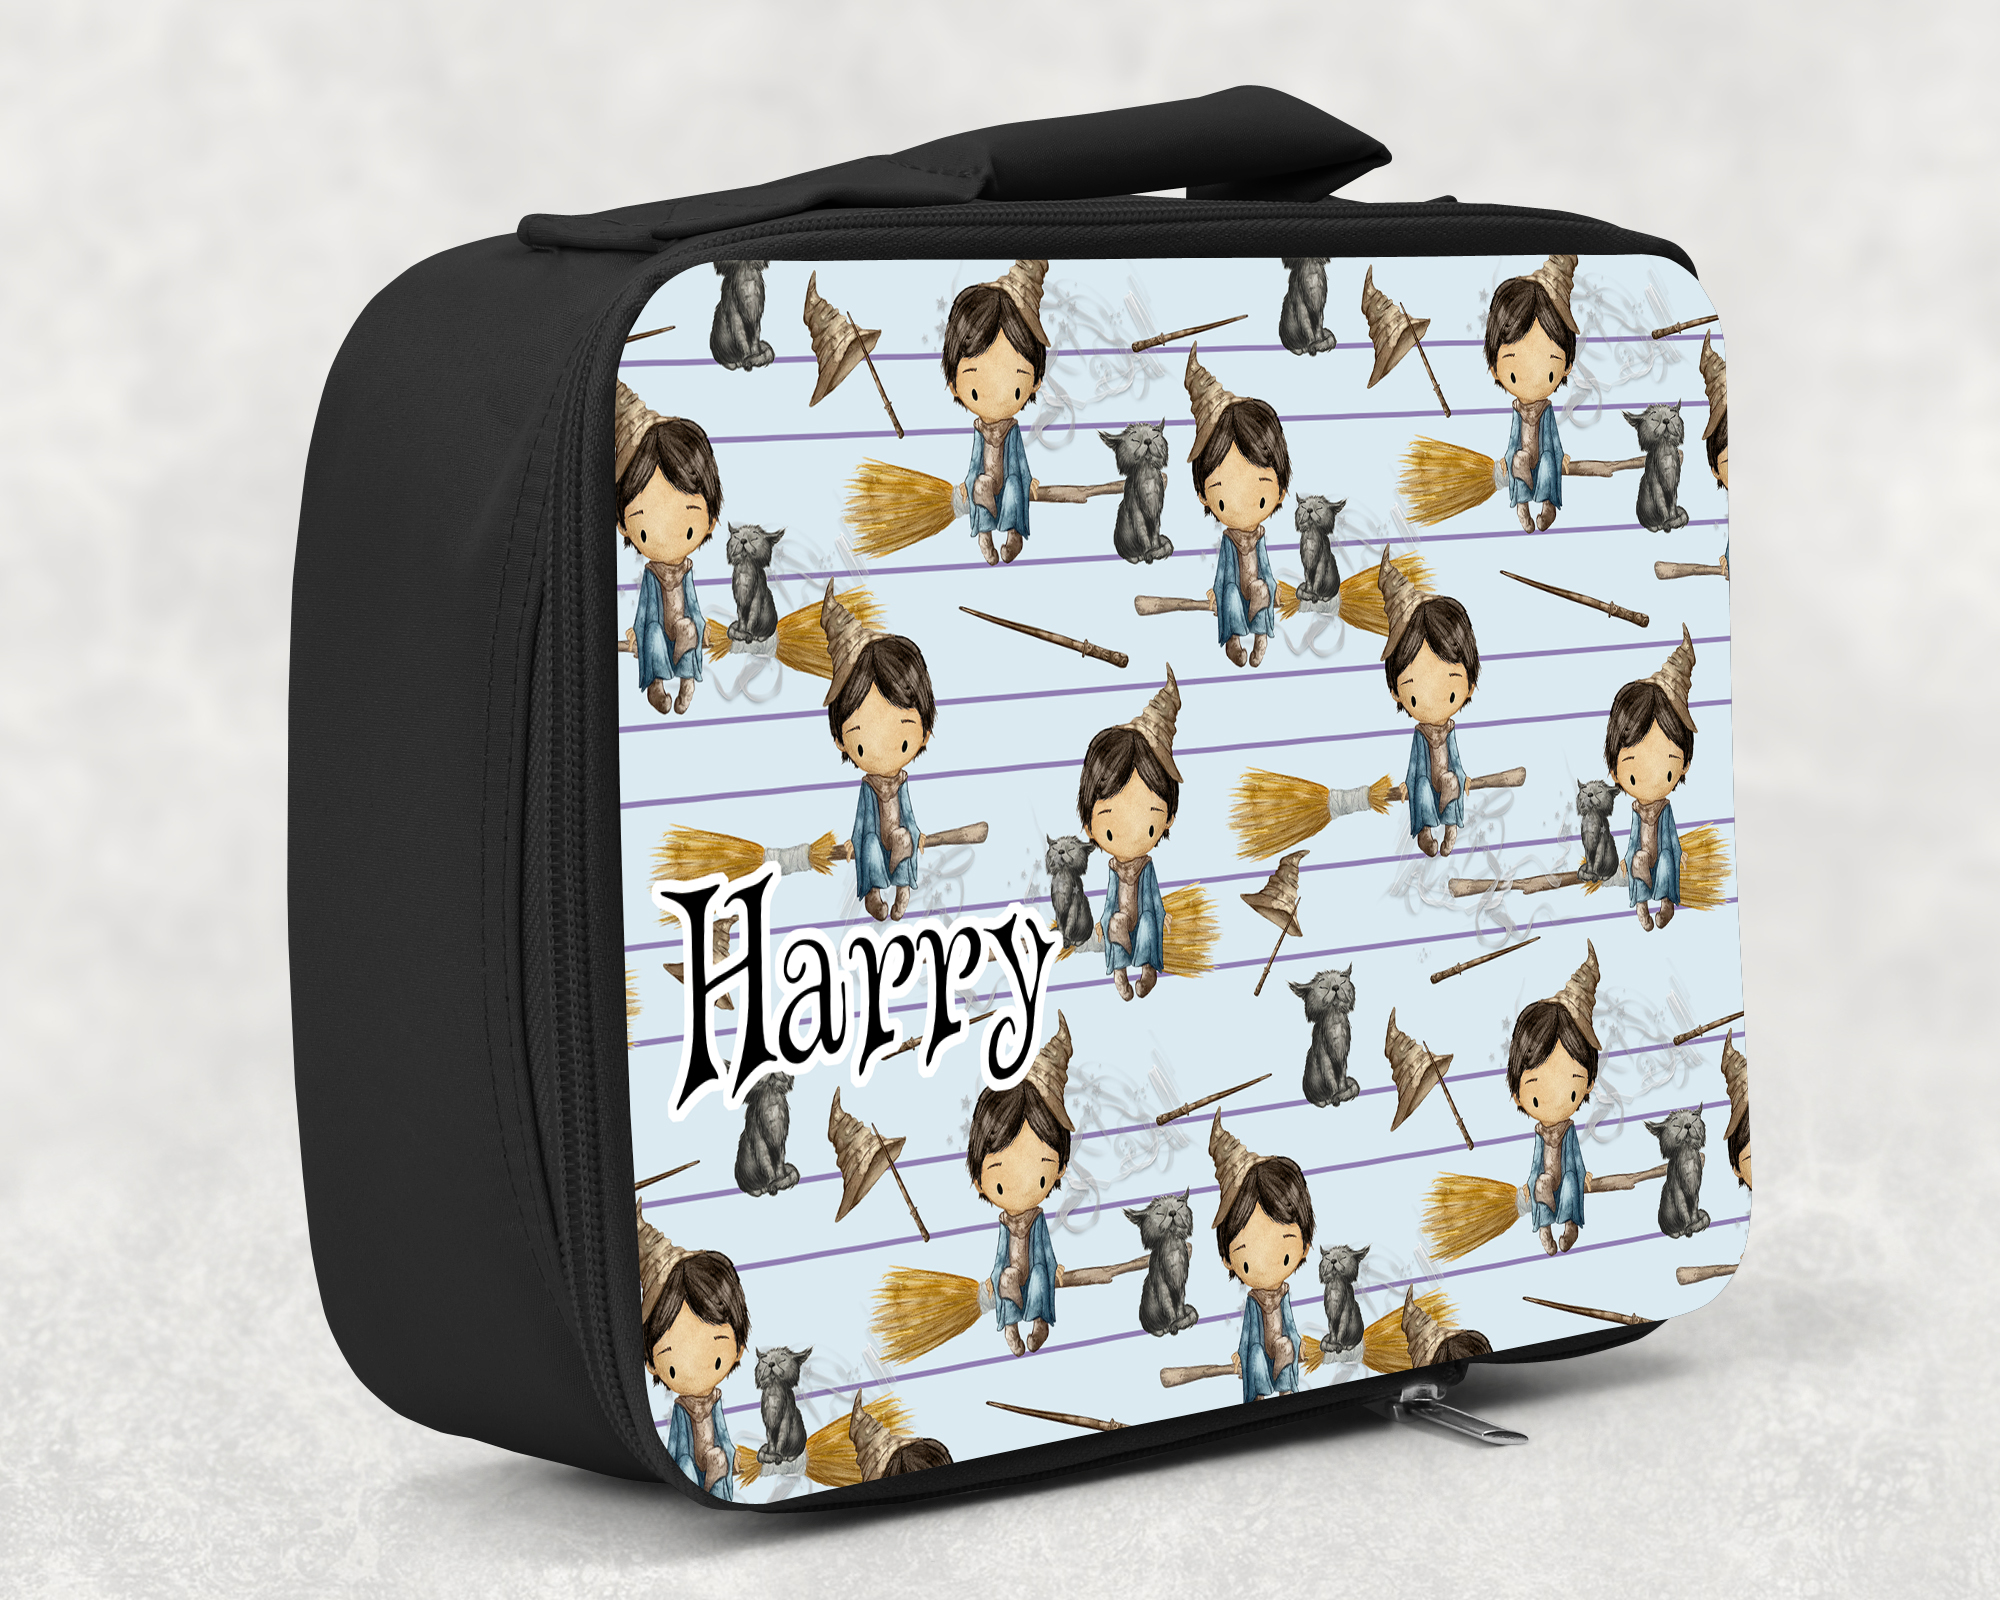 children's insulated lunch bag with bright colourful personalised printed design in harry potter wizard magic theme